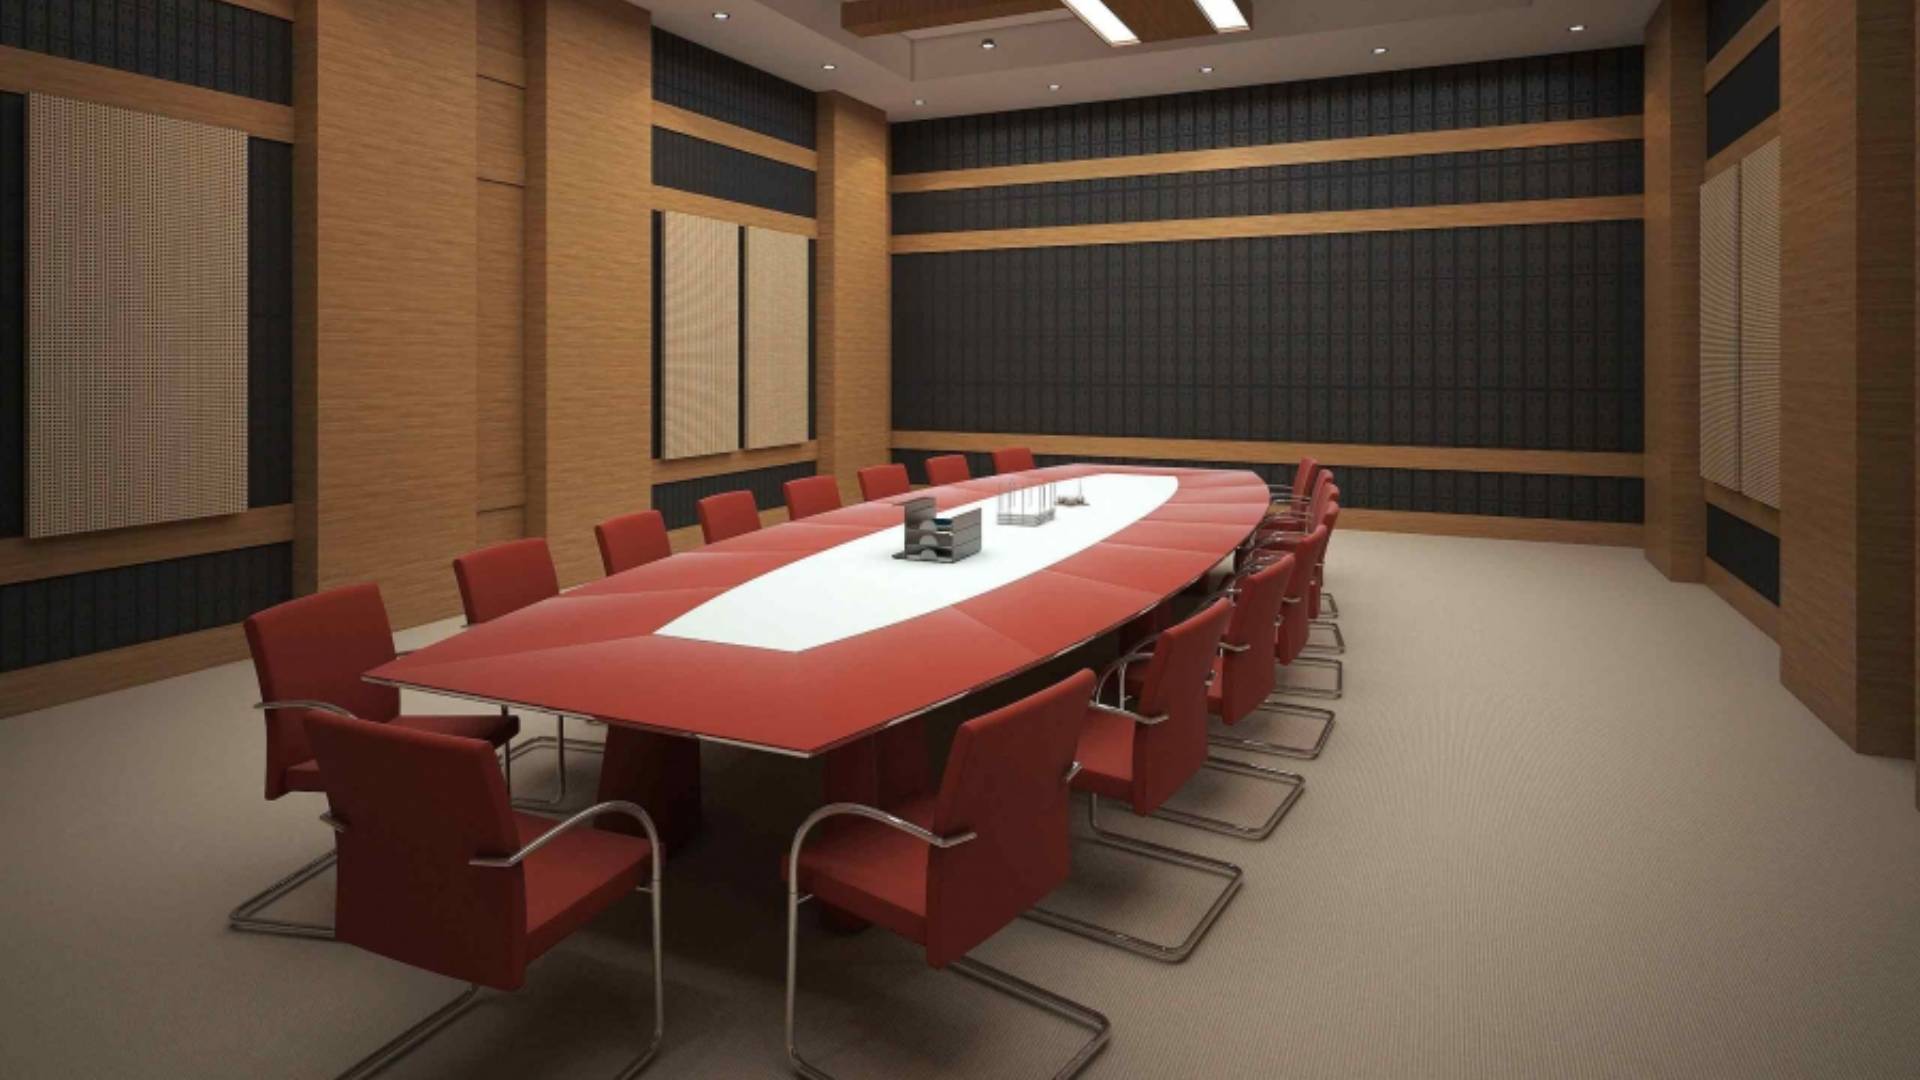 Ministry of Foreign Affairs Campus Meeting Rooms